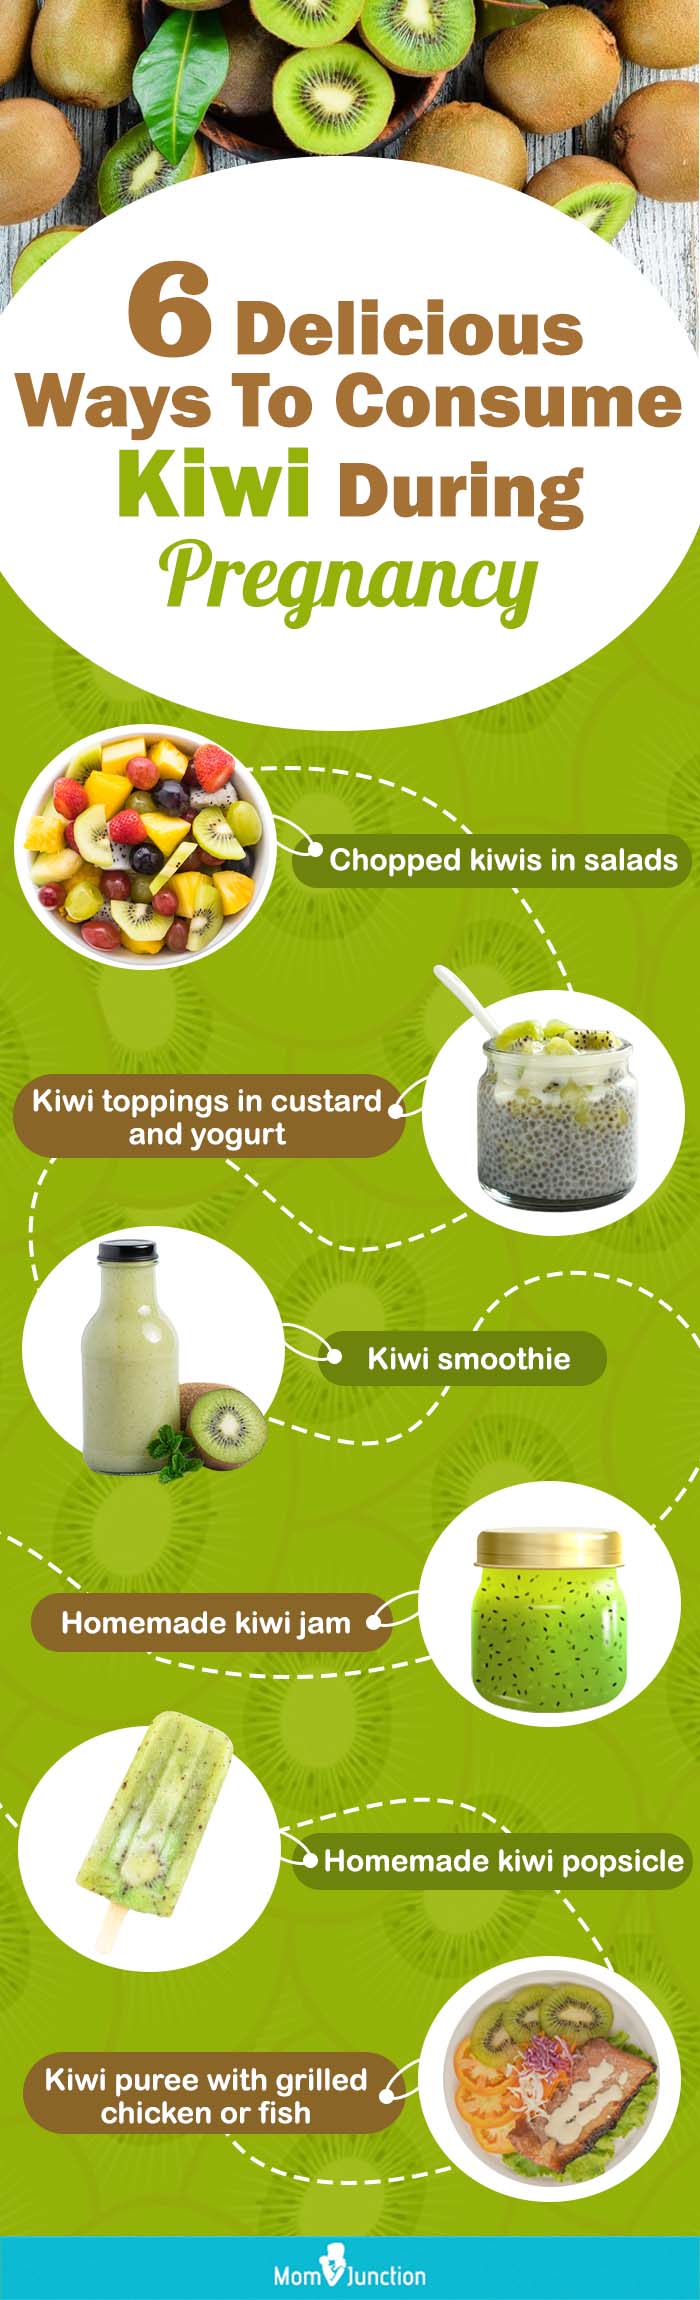 6 delicious ways to consume kiwi during pregnancy (infographic)